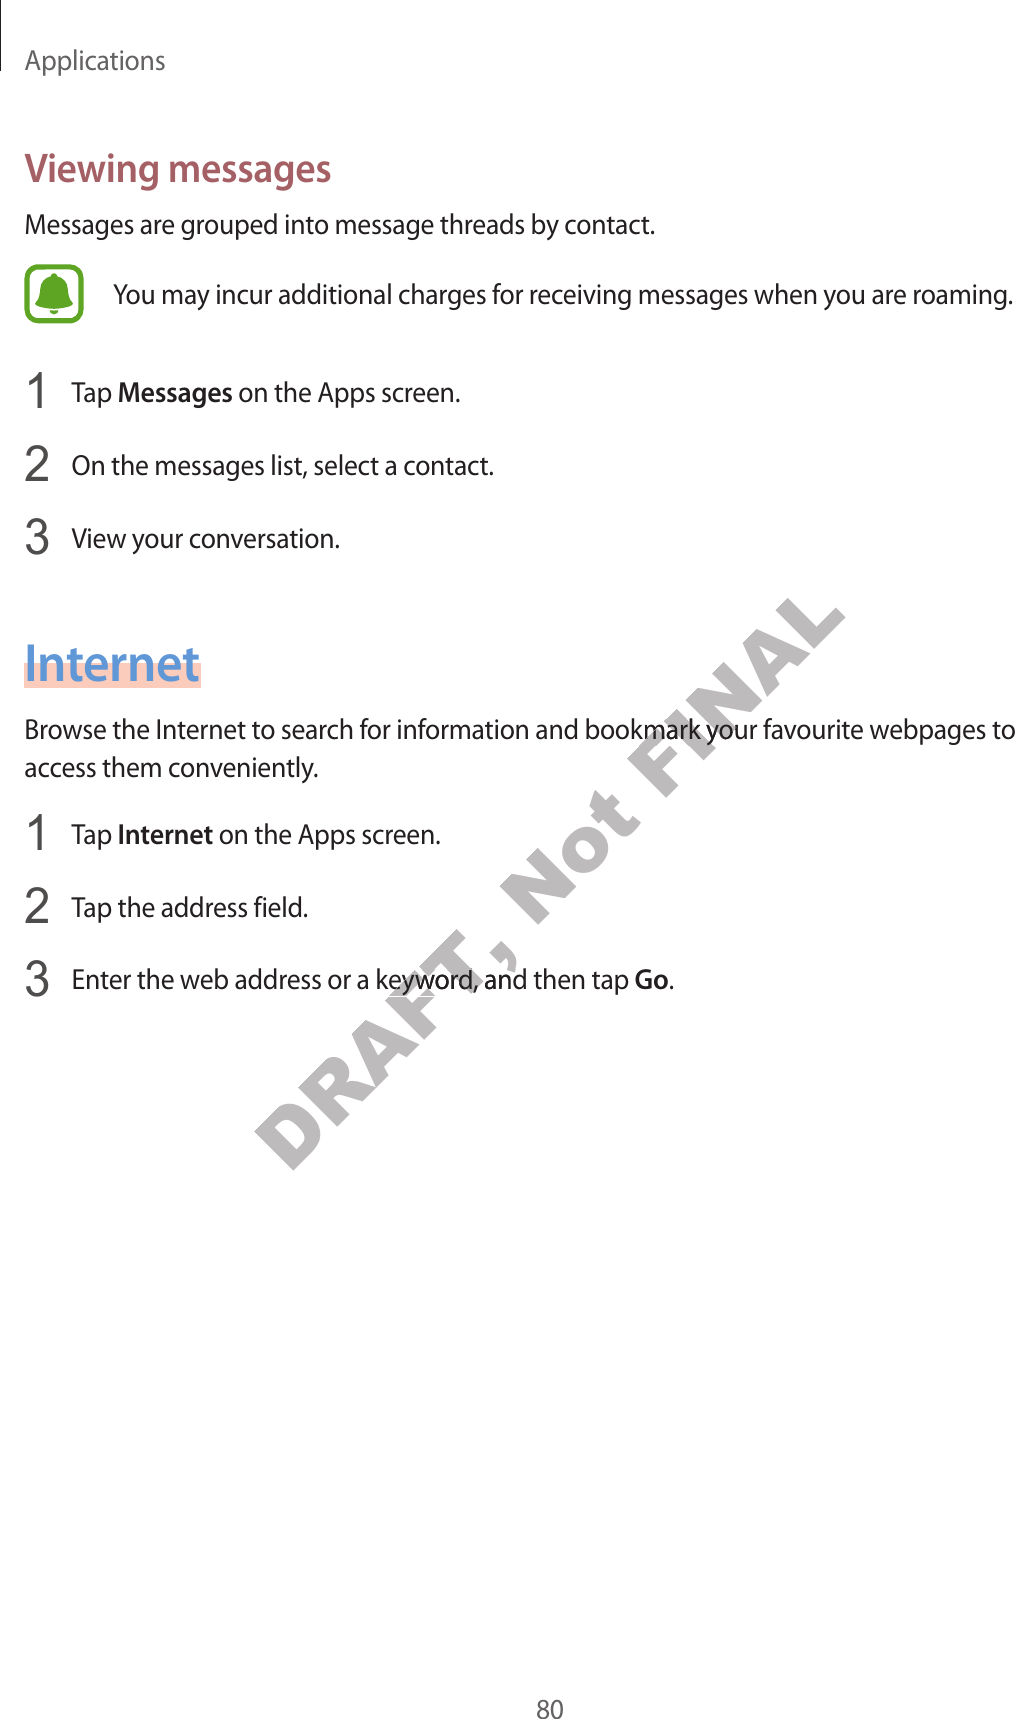 Applications80V ie wing messagesMessages are gr ouped int o message thr eads by c ontact.You may incur additional charges for r ec eiving messages when y ou ar e r oaming .1  Tap Messages on the Apps screen.2  On the messages list, select a contact.3  View y our c on v ersa tion.InternetBrow se the Internet to sear ch for information and bookmark your fav ourite w ebpages t o access them c on v eniently.1  Tap Internet on the Apps screen.2  Tap the address field.3  Enter the w eb addr ess or a keywor d , and then tap Go.DRAFT, Enter the w eb addr ess or a keywor d , and then tap DRAFT, Enter the w eb addr ess or a keywor d , and then tap Not FINALBrow se the Internet to sear ch for information and bookmark your fav ourite w ebpages t o FINALBrow se the Internet to sear ch for information and bookmark your fav ourite w ebpages t o 